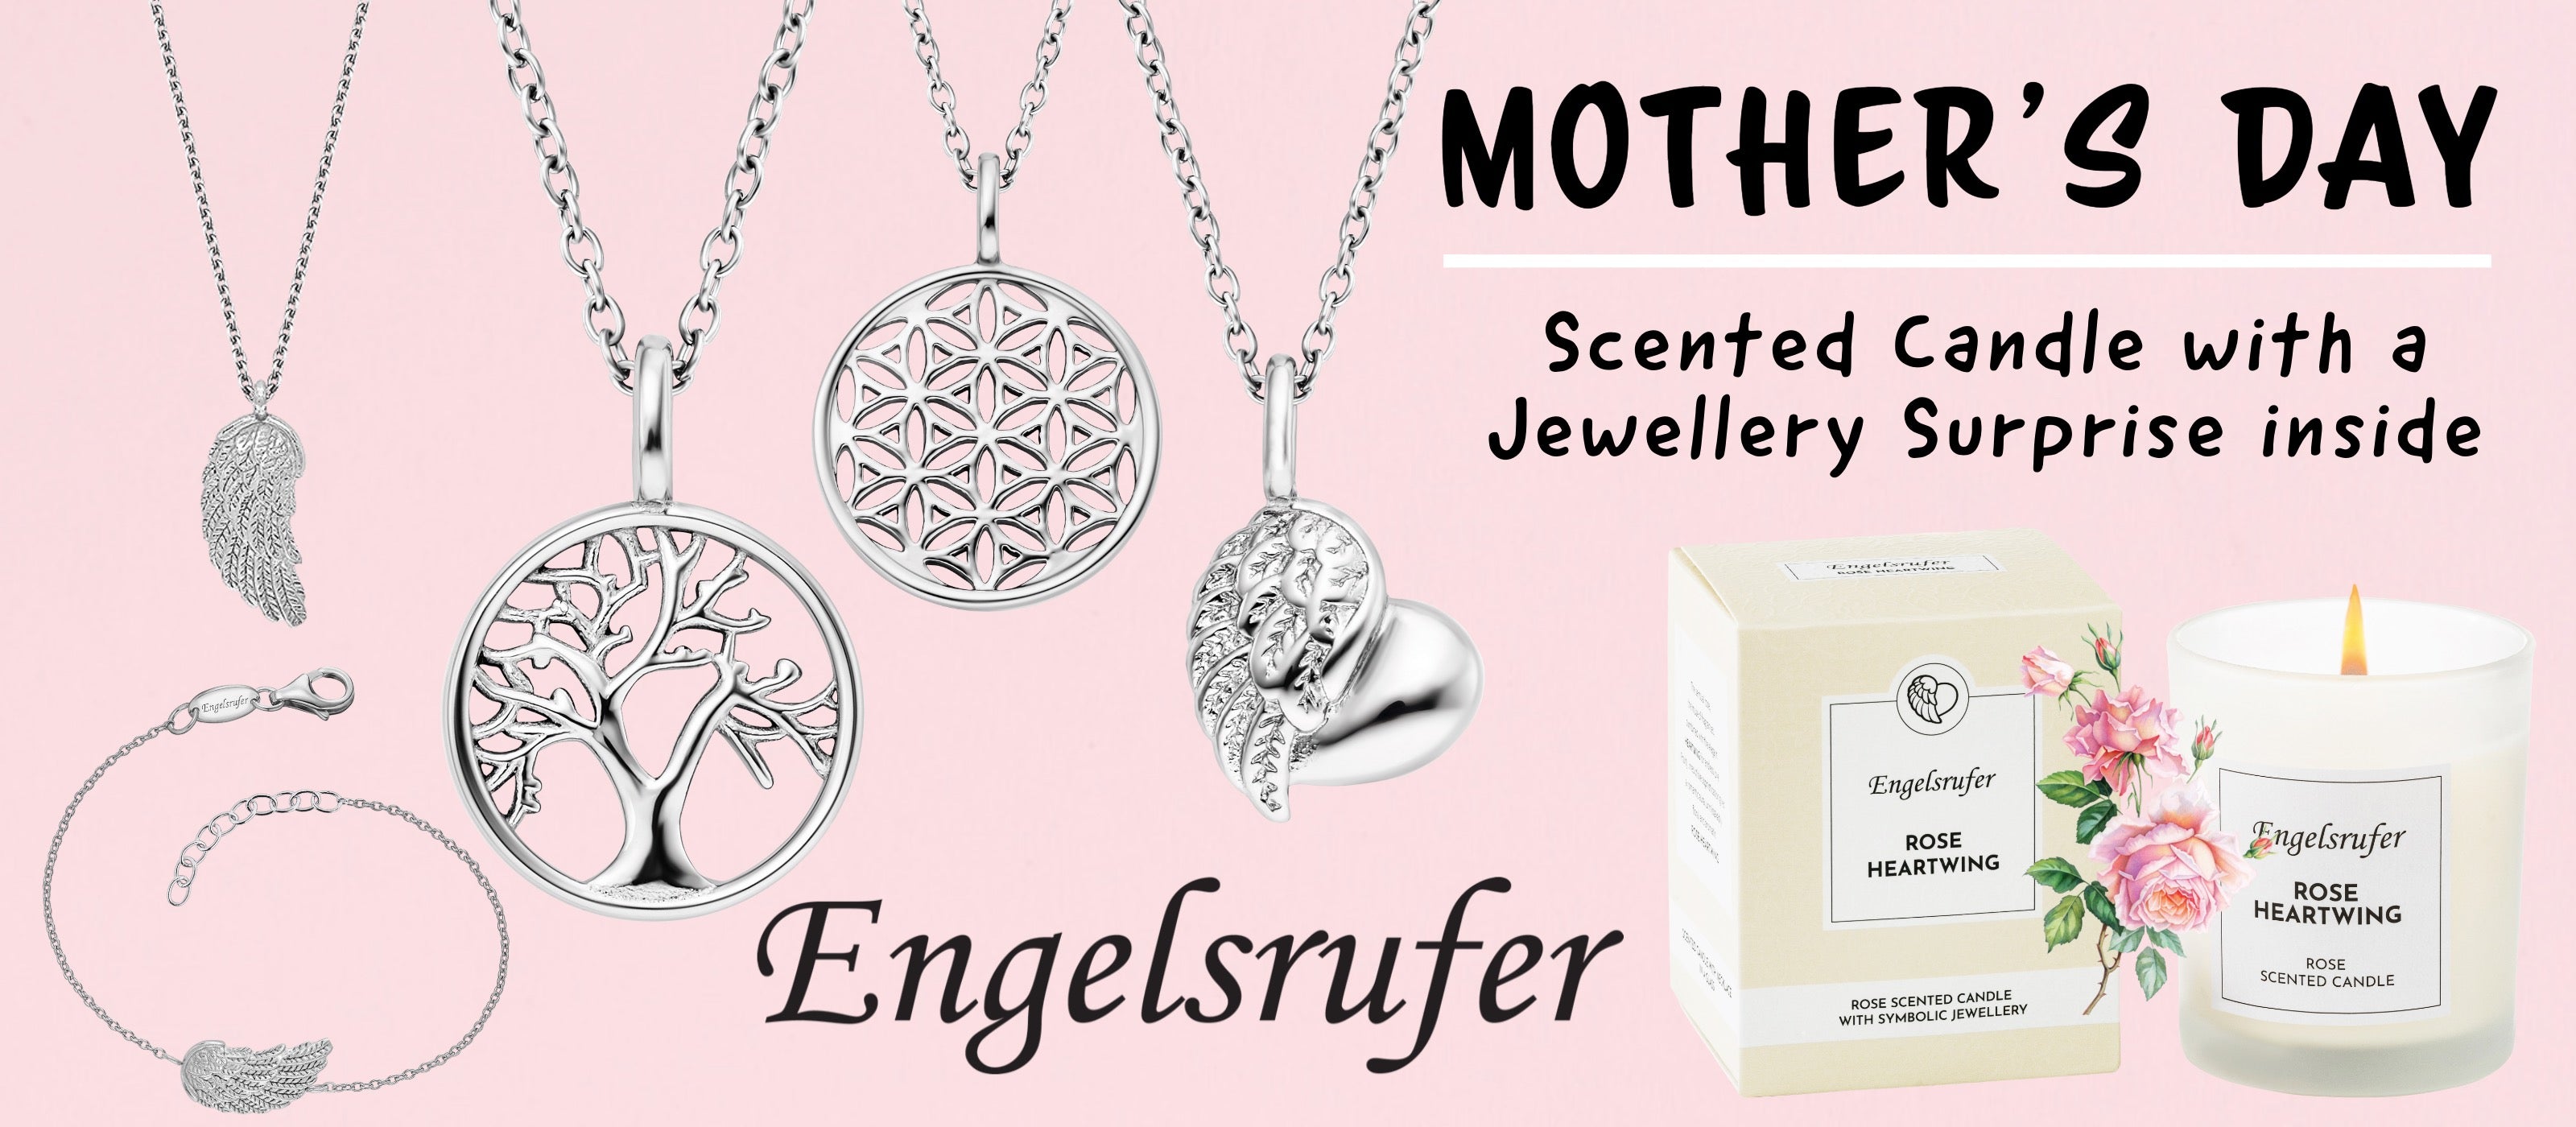 Mother's Day Scented Candle & Jewellery Surprise | Engelsrufer Australia